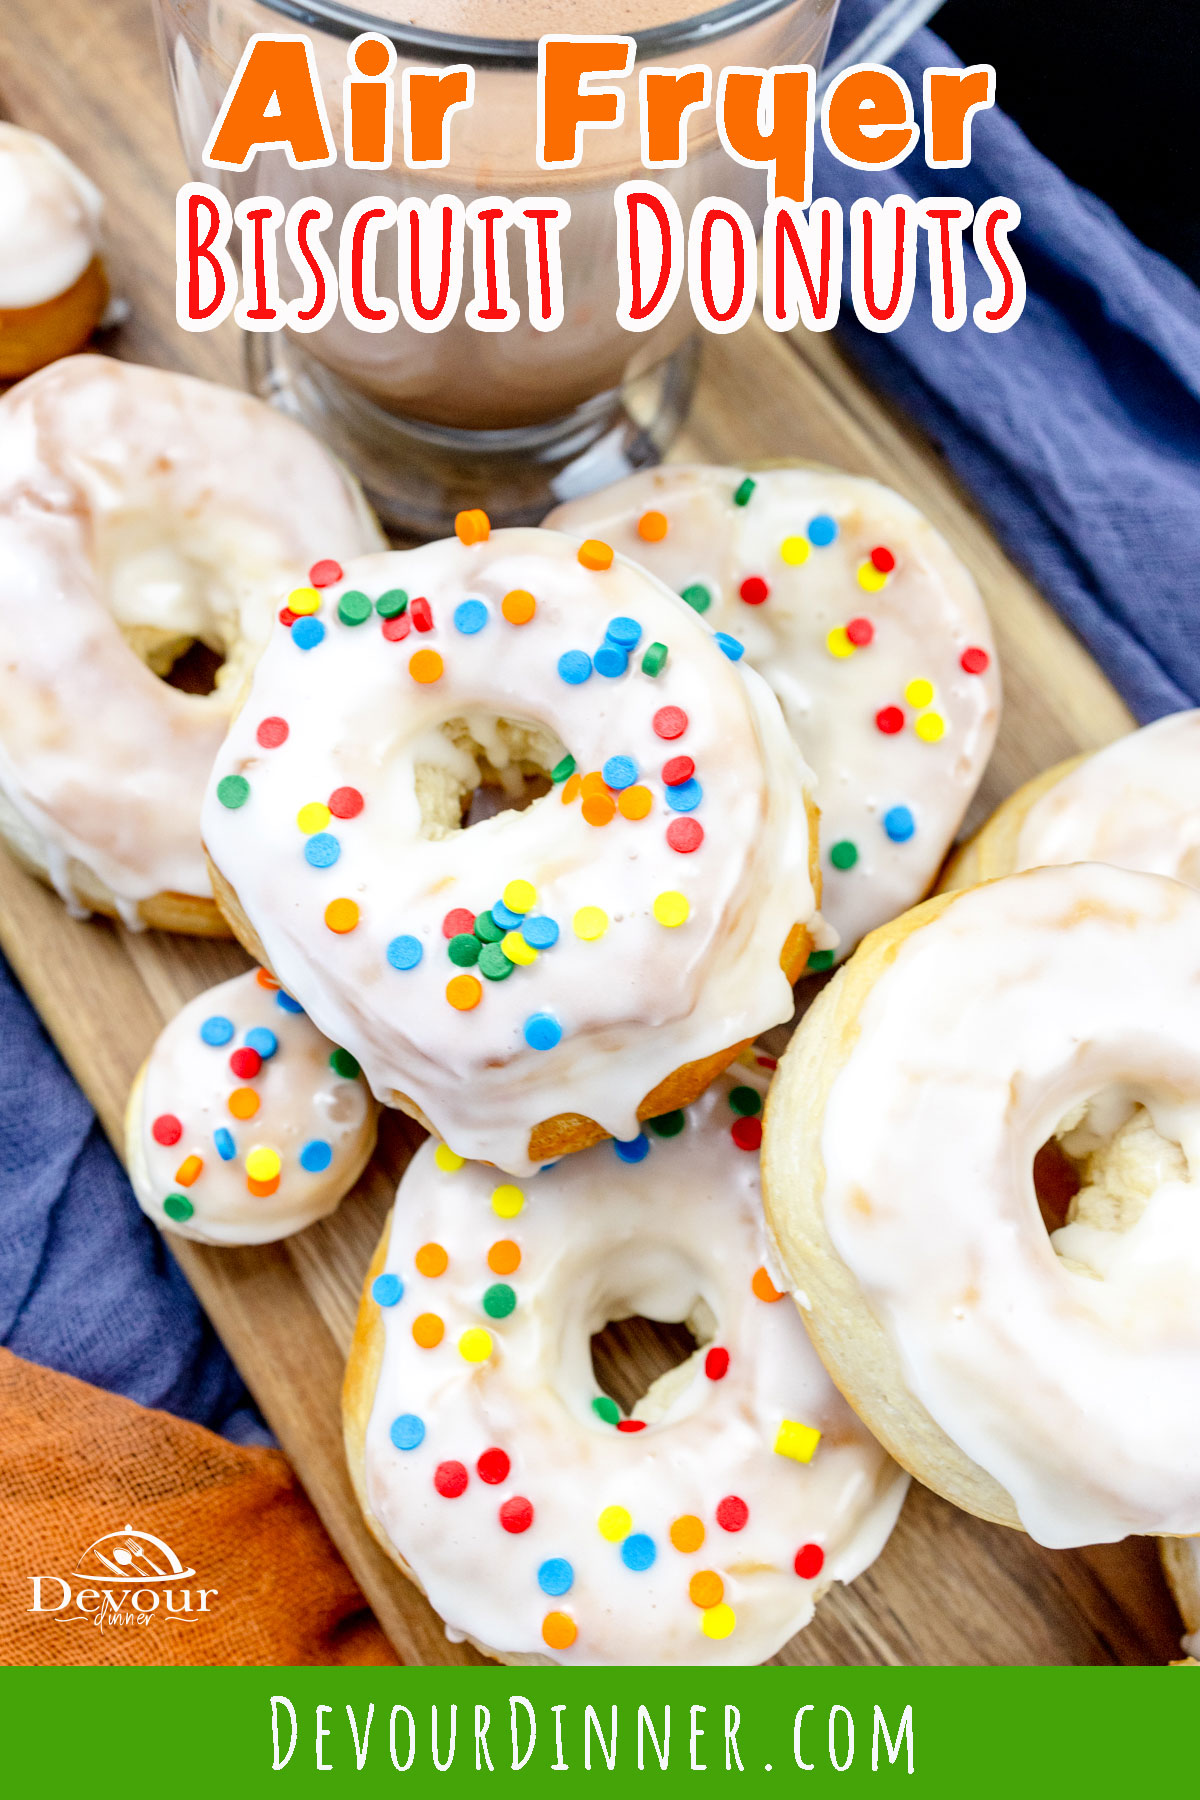 This Air Fryer Biscuit Donuts recipe transforms a modest can of biscuits into fabulous homemade donuts! This easy treat will be your new favorite breakfast snack to go with your morning cup of coffee!